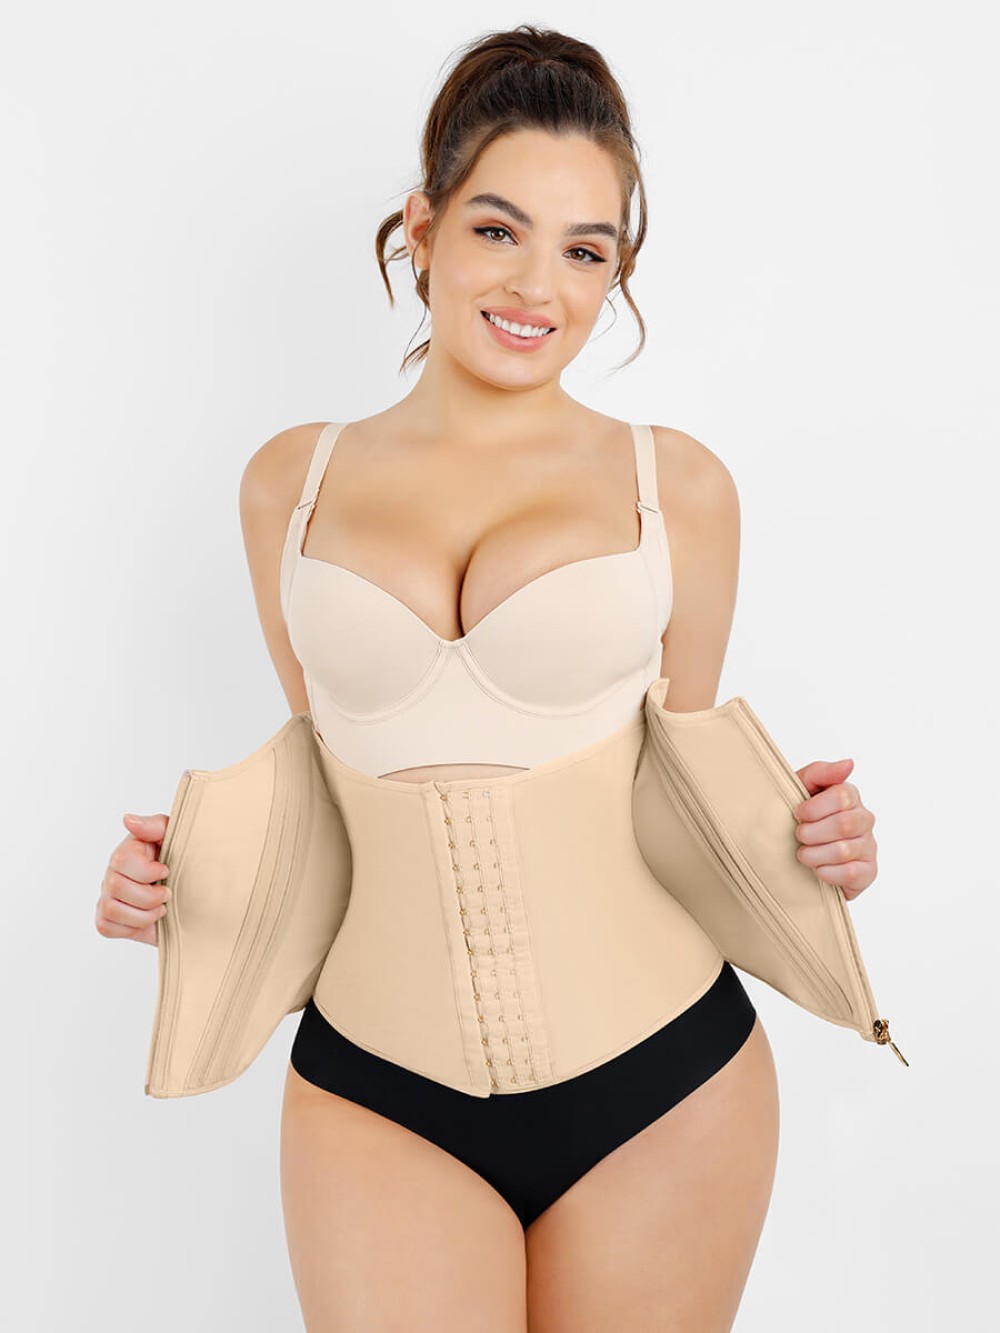 Hourglass Figure Shaping Waist Trainer with 15 Built-in Steel Bone